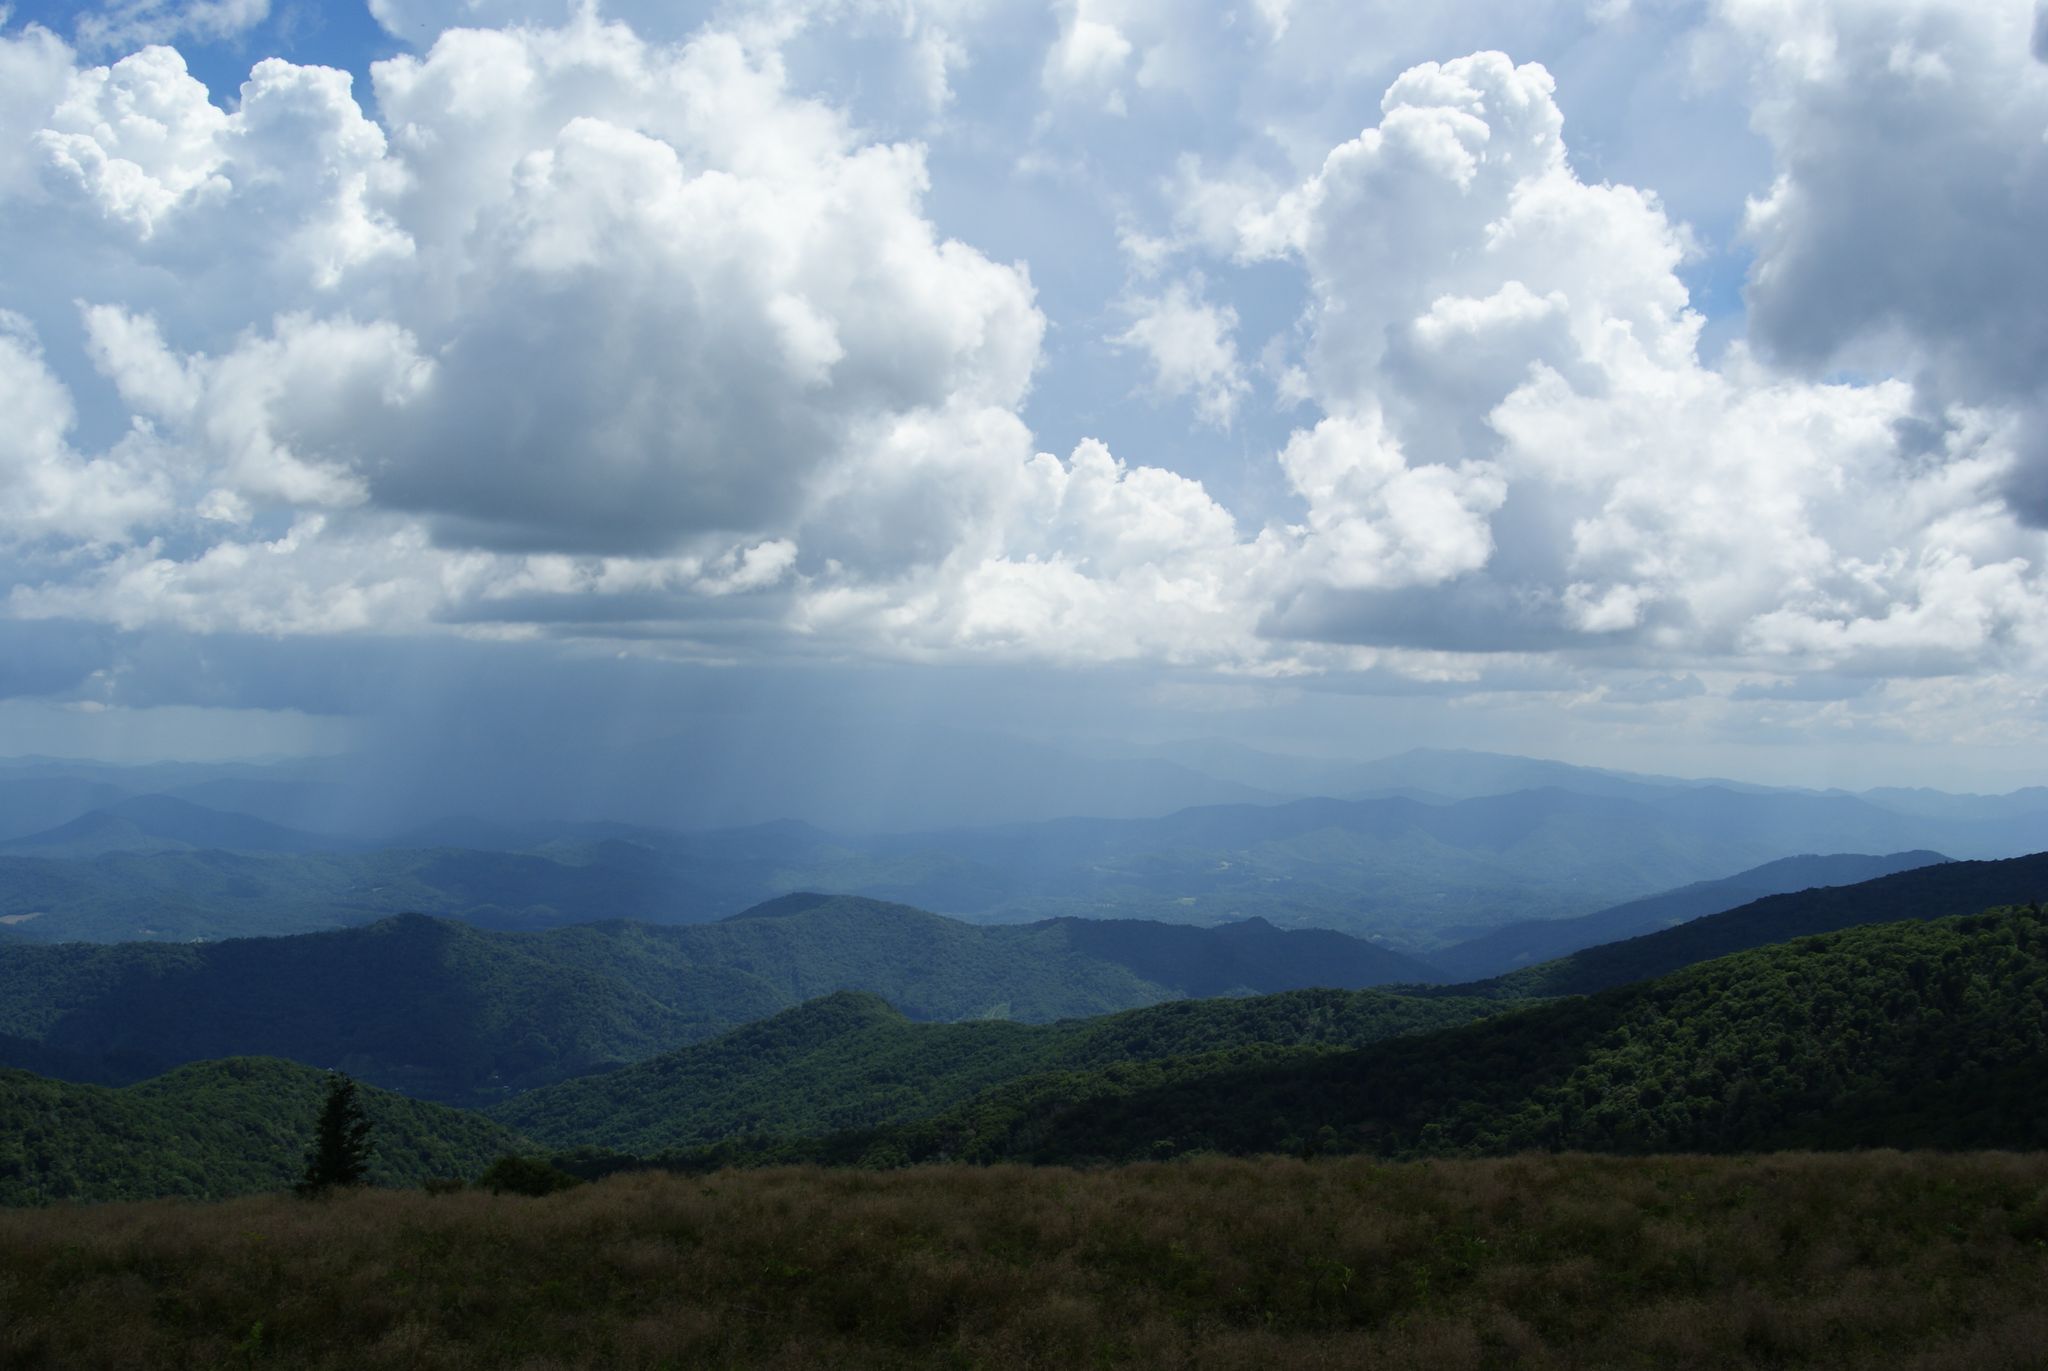 Appalachians from Roan Mountain State Park summit